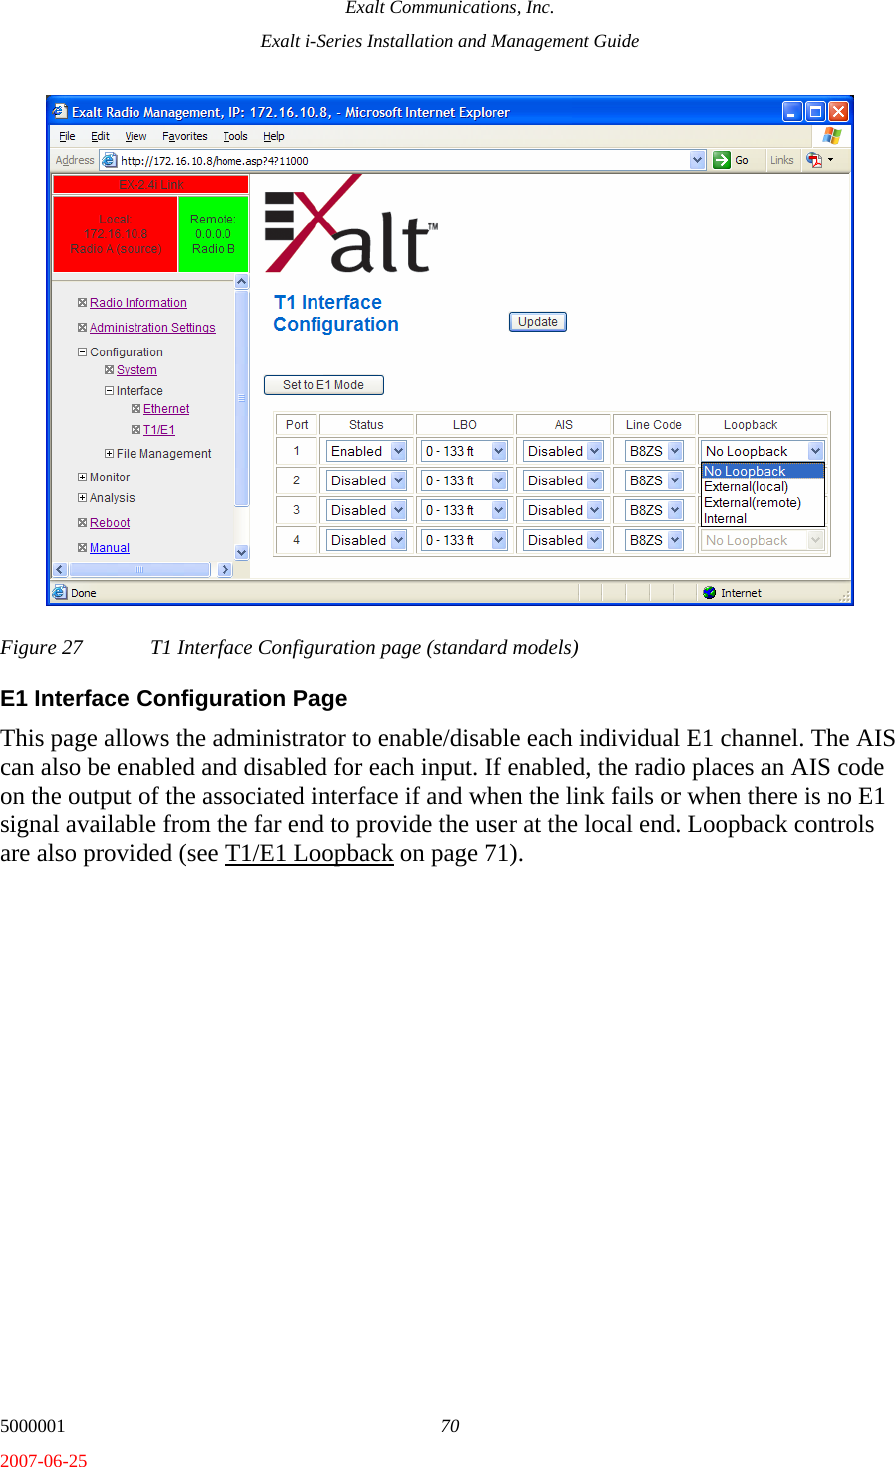 Exalt Communications, Inc. Exalt i-Series Installation and Management Guide 5000001  70 2007-06-25 Figure 27  T1 Interface Configuration page (standard models) E1 Interface Configuration Page This page allows the administrator to enable/disable each individual E1 channel. The AIS can also be enabled and disabled for each input. If enabled, the radio places an AIS code on the output of the associated interface if and when the link fails or when there is no E1 signal available from the far end to provide the user at the local end. Loopback controls are also provided (see T1/E1 Loopback on page 71). 